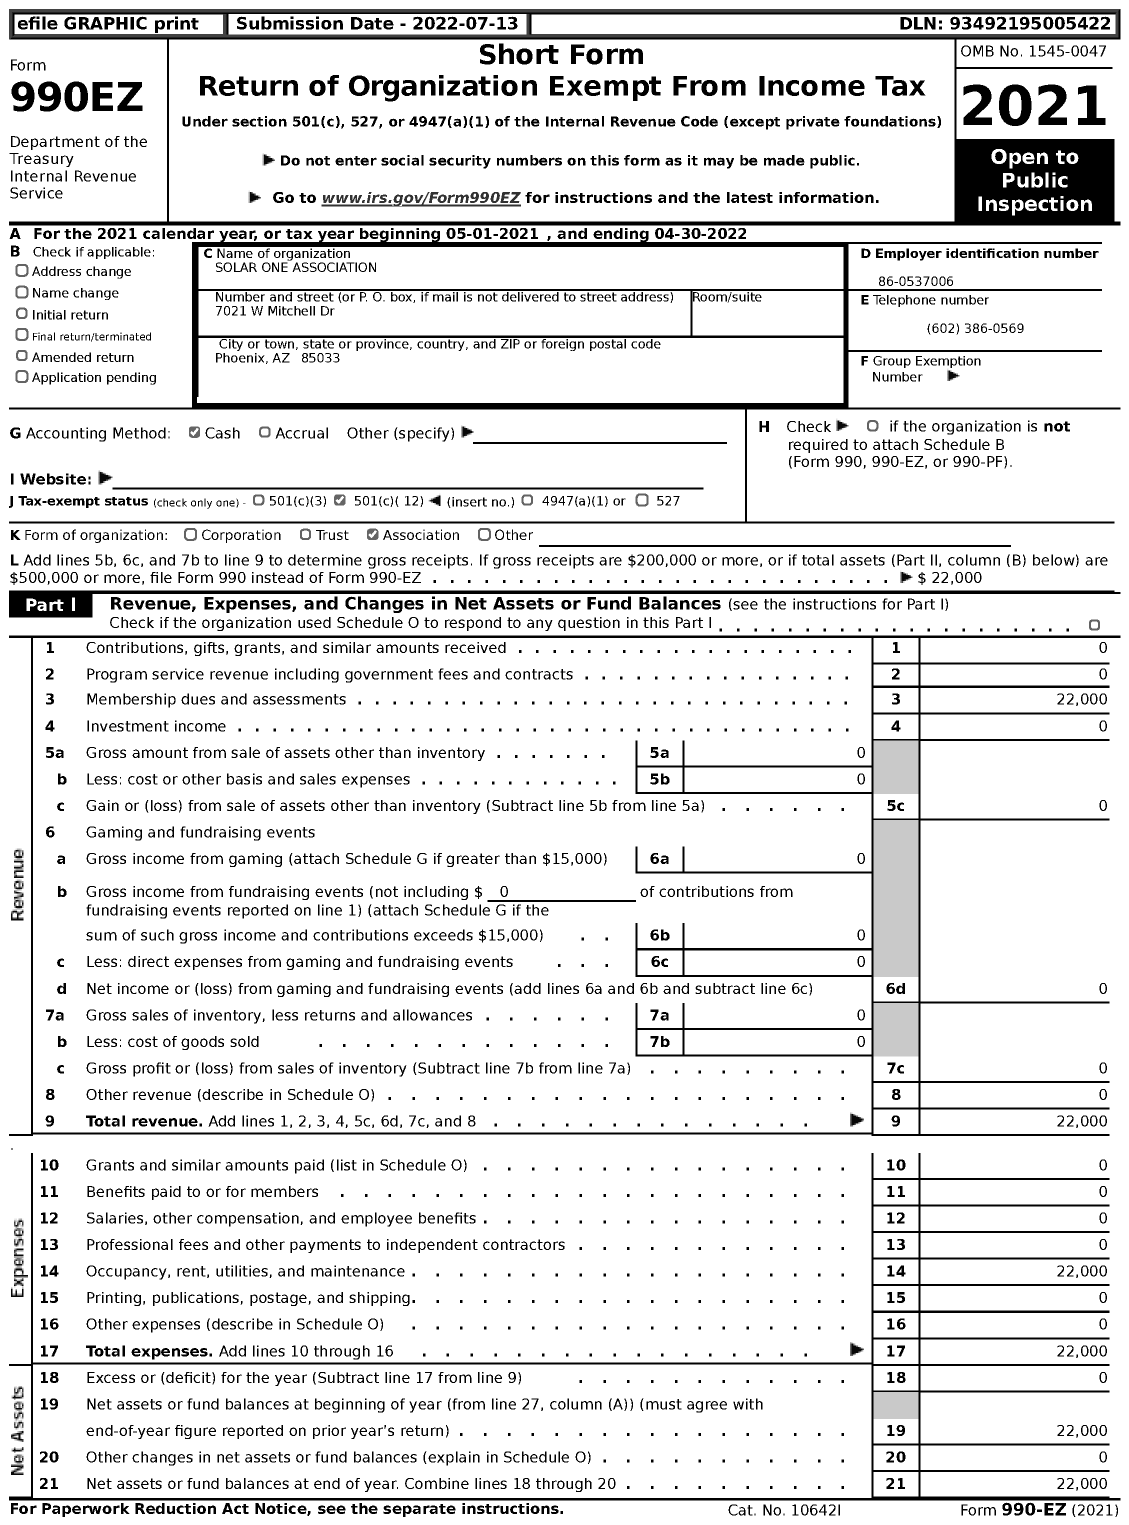 Image of first page of 2021 Form 990EZ for Solar One Association